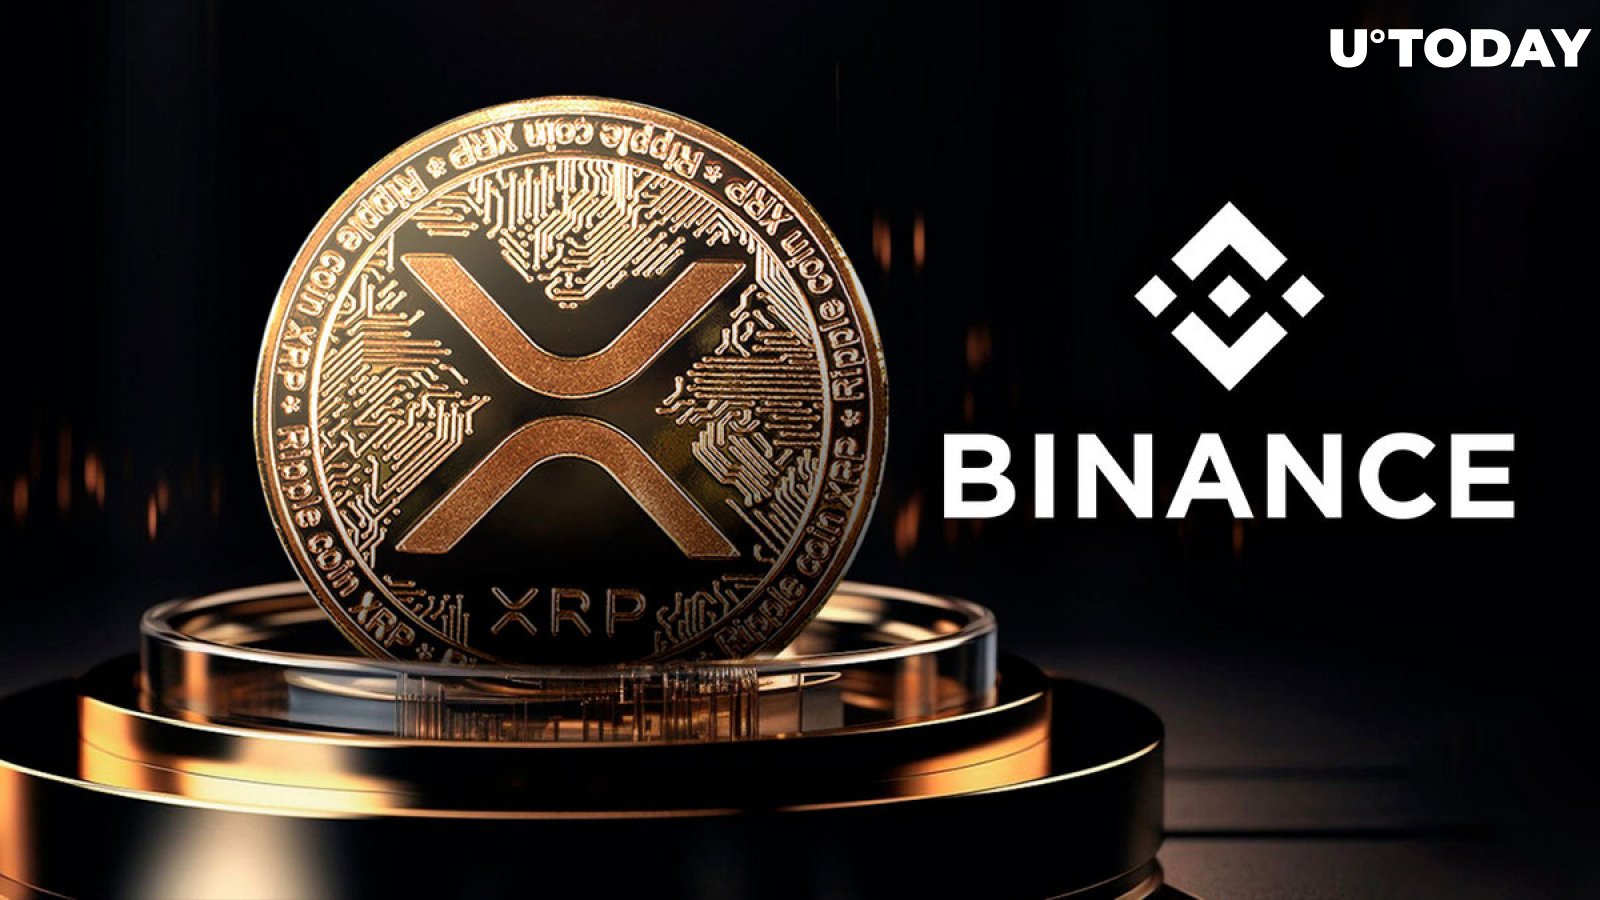 Binance's Mysterious XRP Flip Continues at 18 Million XRP Reserves